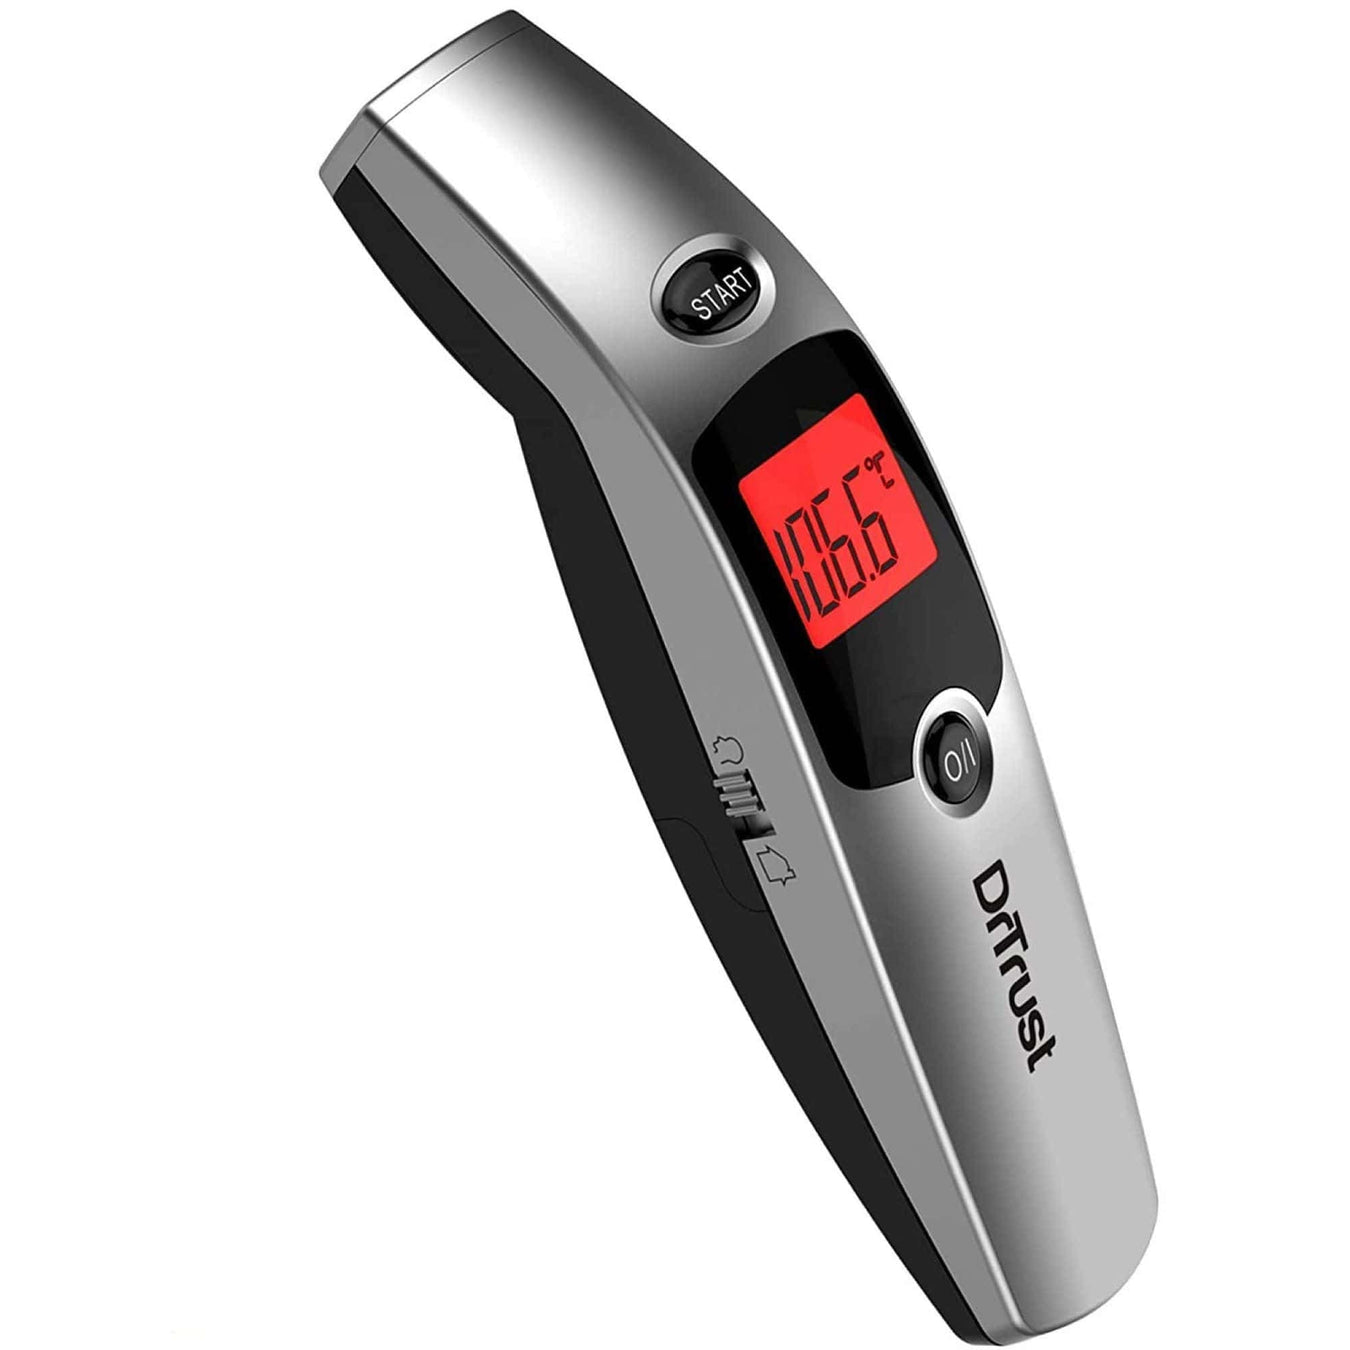 Dr Trust Infrared Thermometers for Temperature Scanning